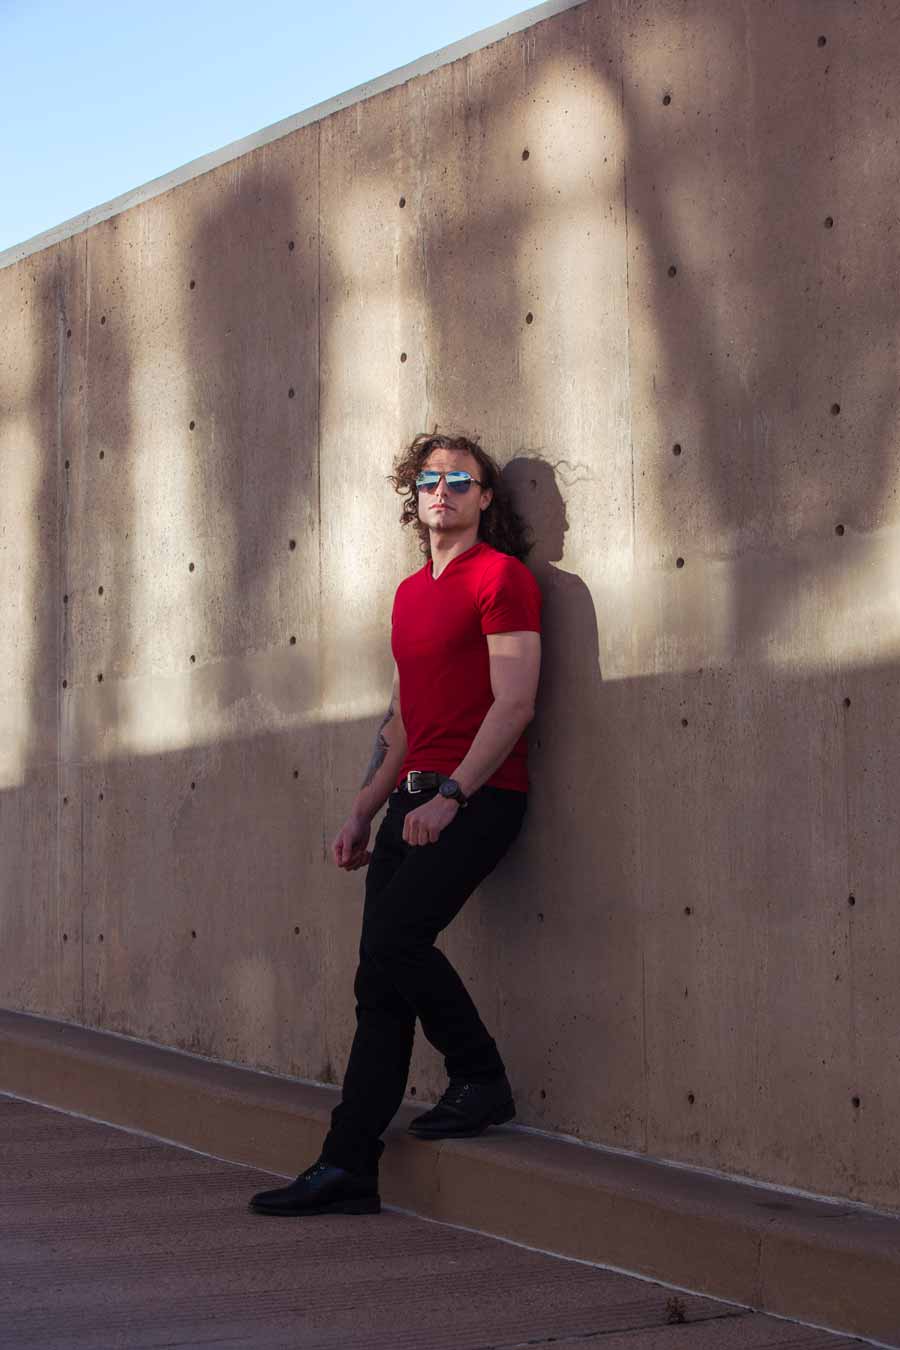 white male model in his twenties with shoulder length curly hair aviator sunglass and a red shirt